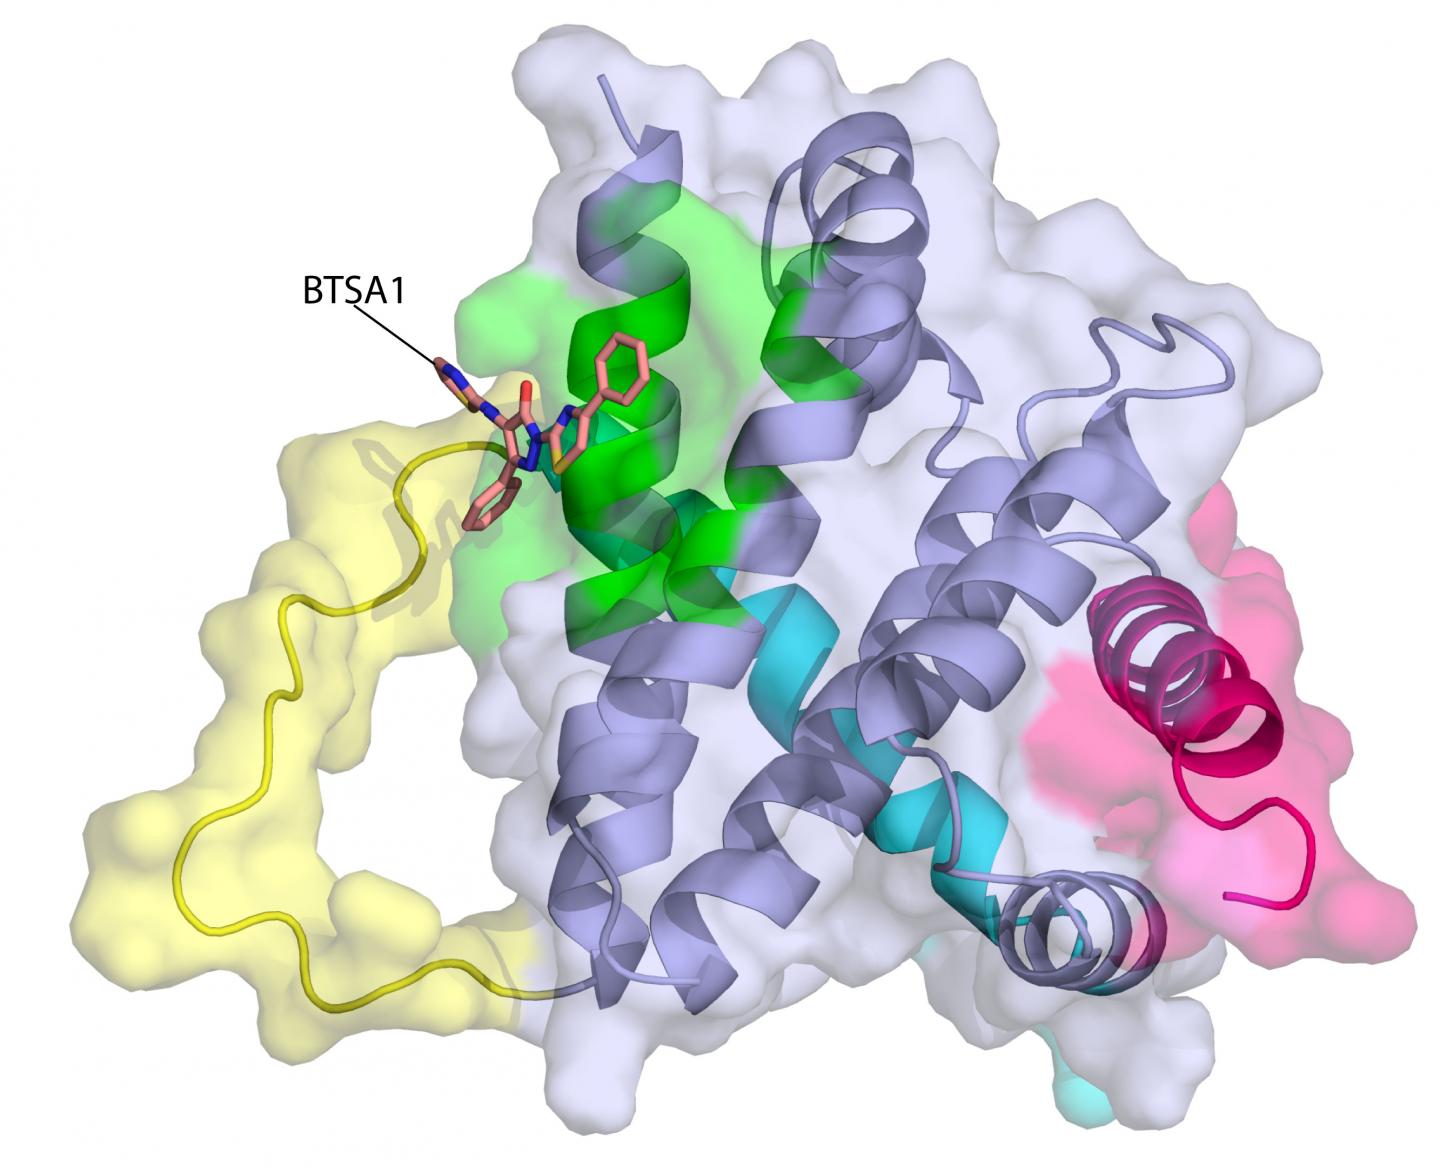 Protein BAX, Activated by BTSA1